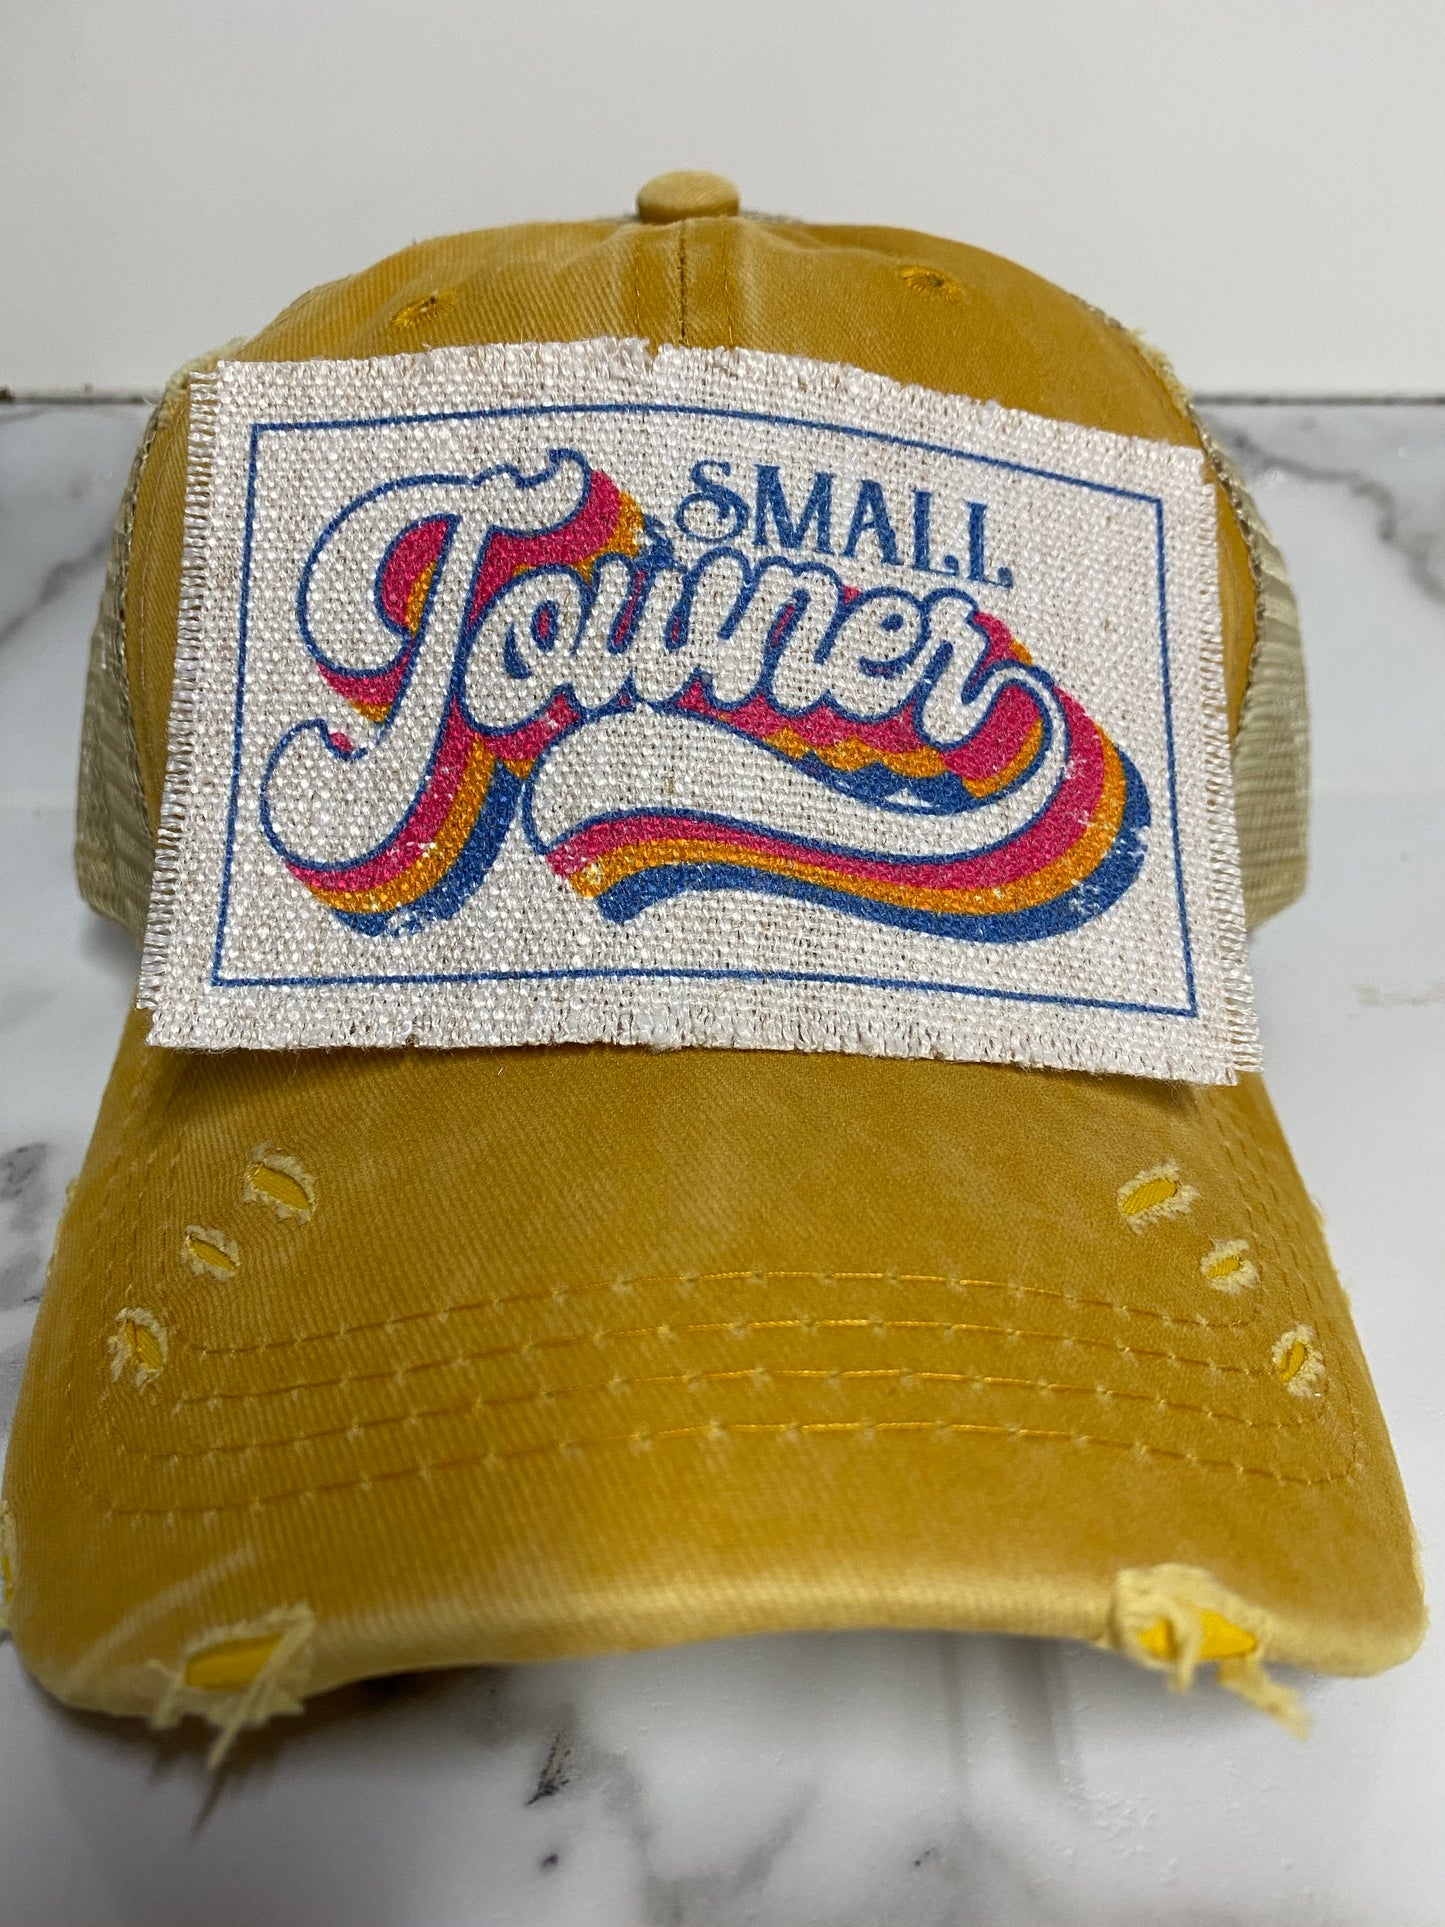 Small Towner Hat Patch